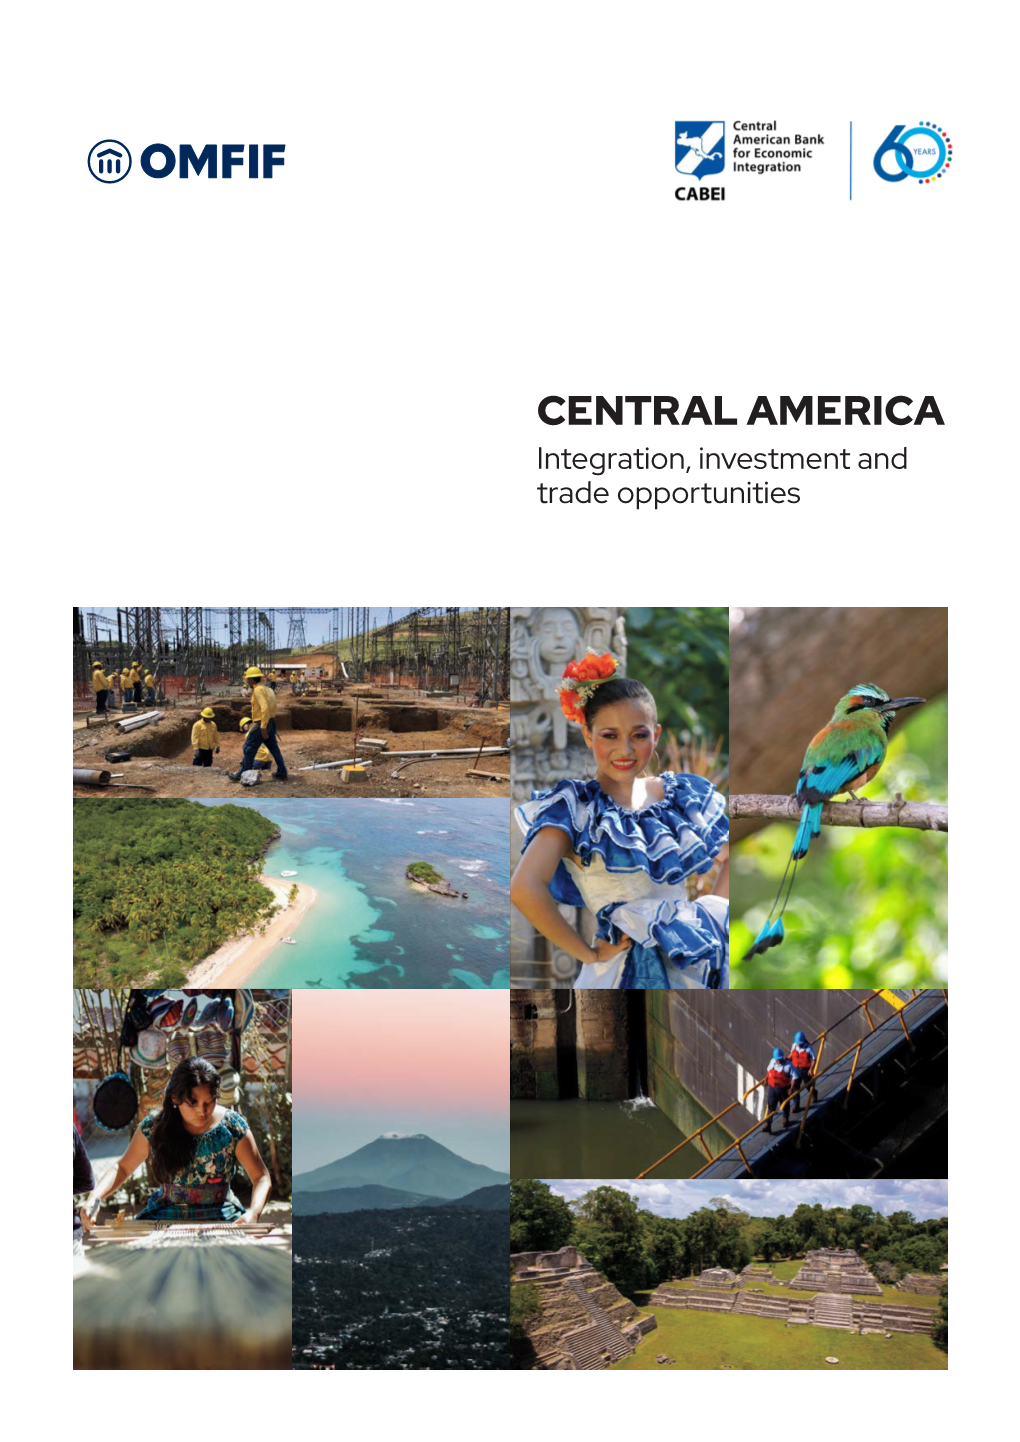 CENTRAL AMERICA Integration, Investment and Trade Opportunities 2 CENTRAL AMERICA: INTEGRATION, INVESTMENT and TRADE OPPORTUNITIES